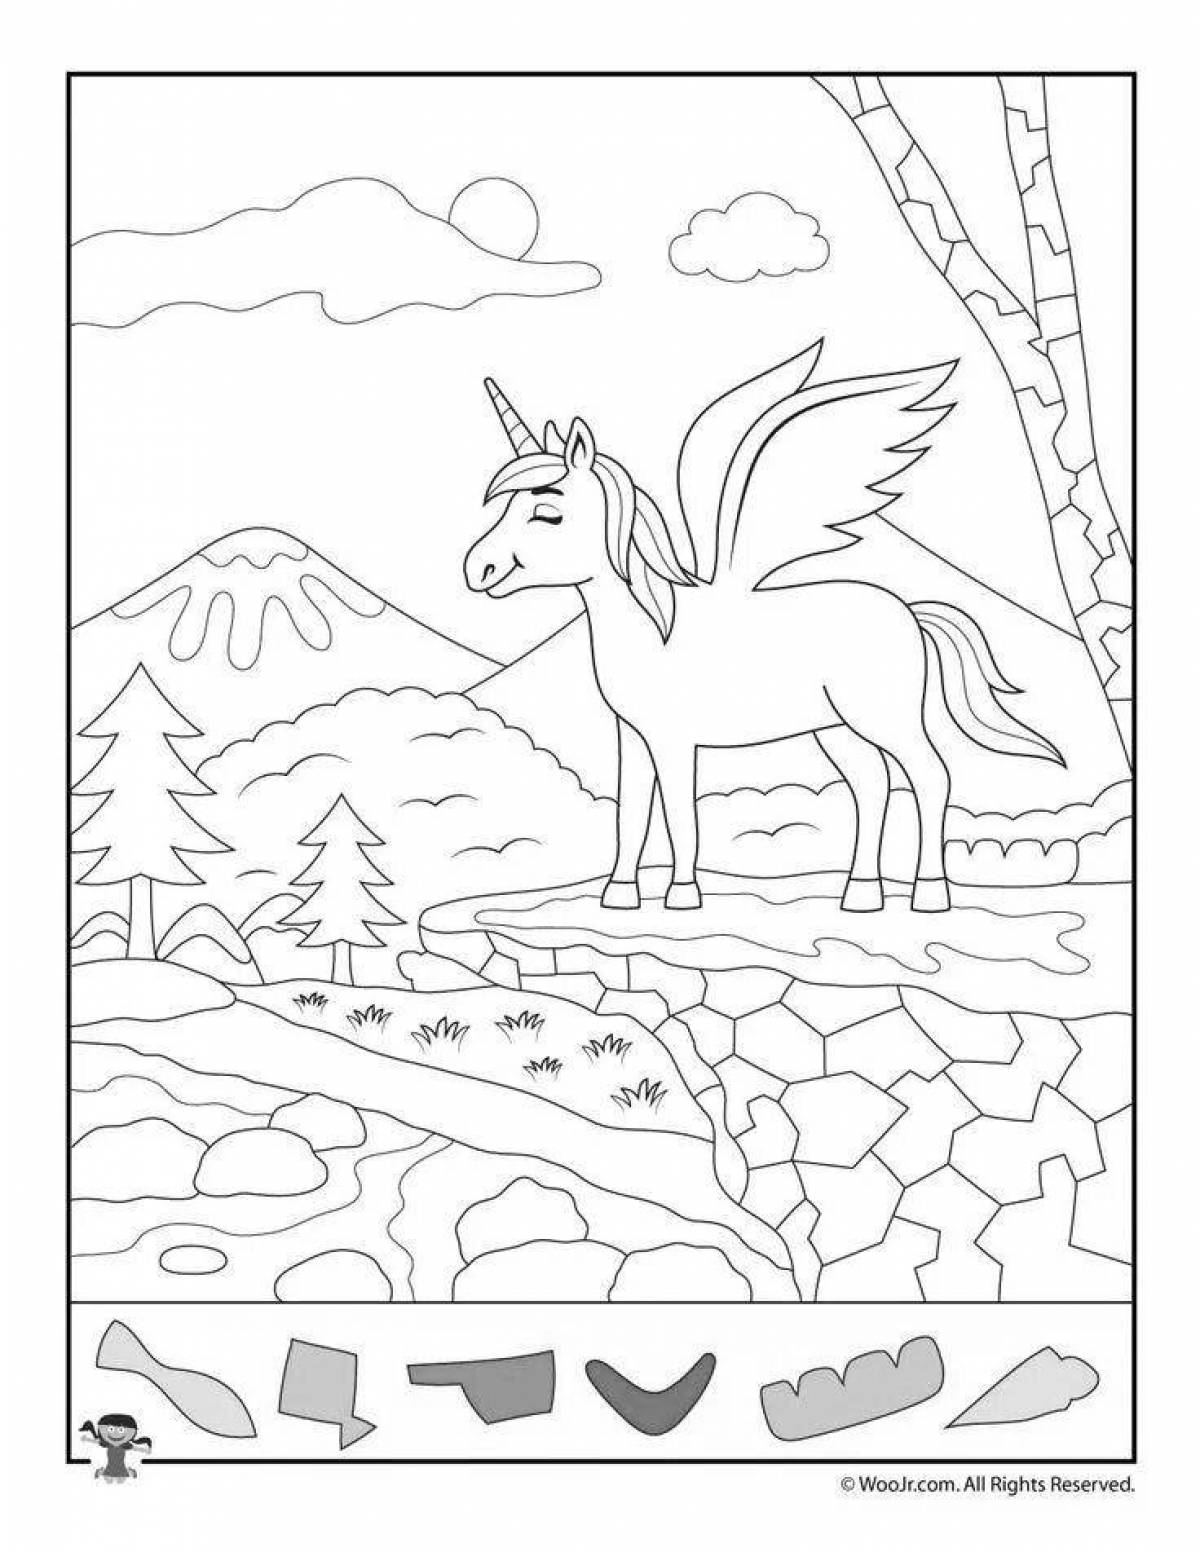 Adorable unicorn coloring by numbers